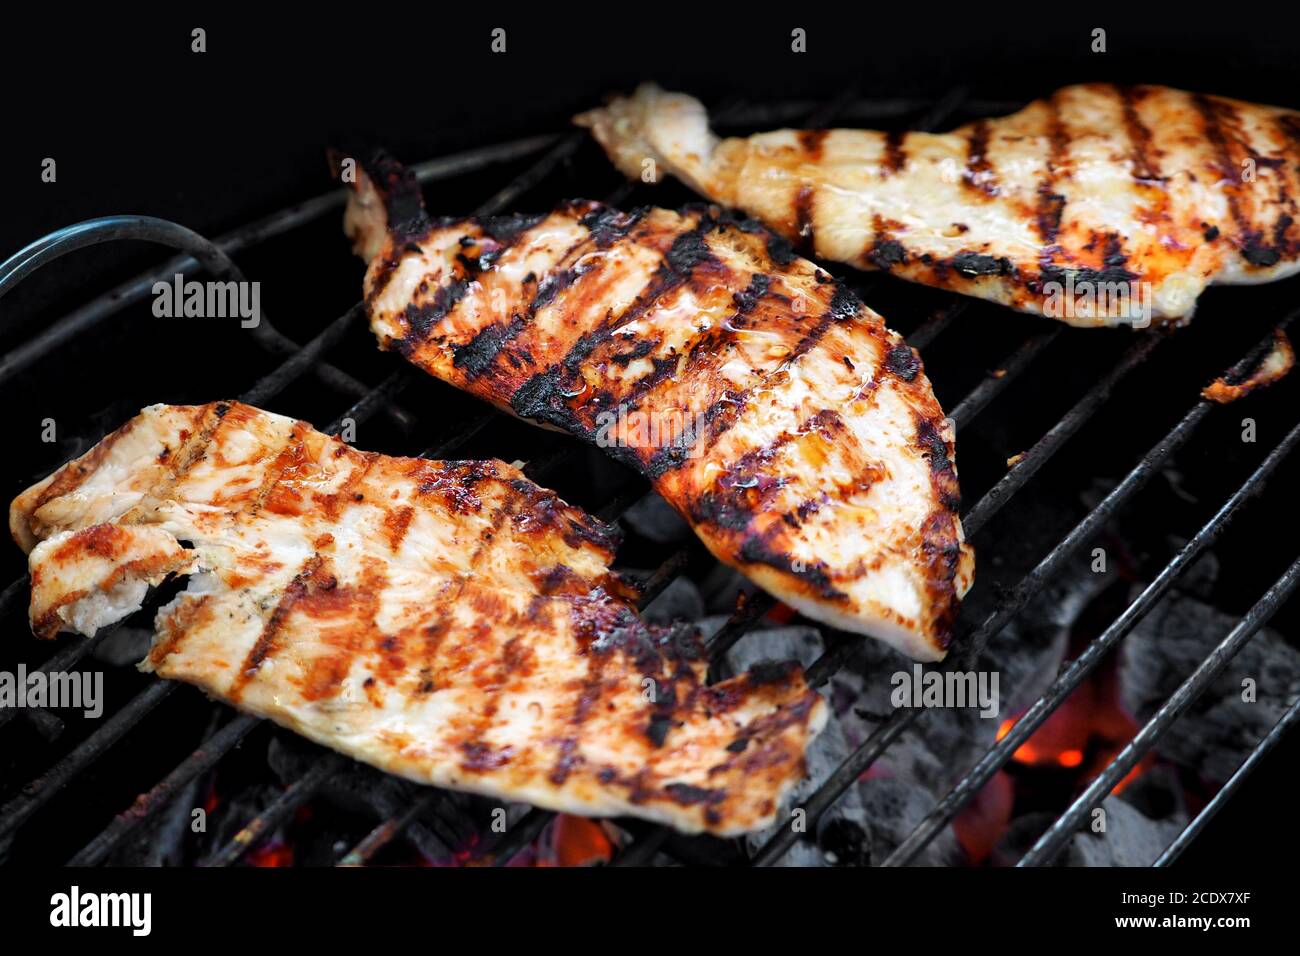 Chicken fillet fried on the grill. Macro shot. Blurred background. Stock Photo